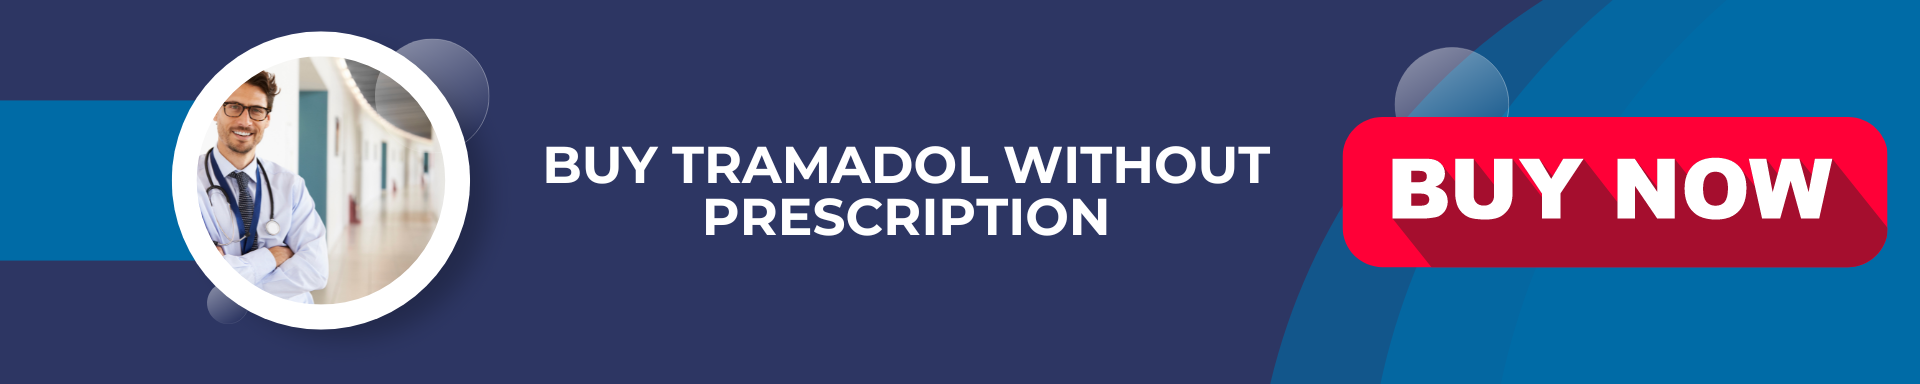 Buy Tramadol over the counter